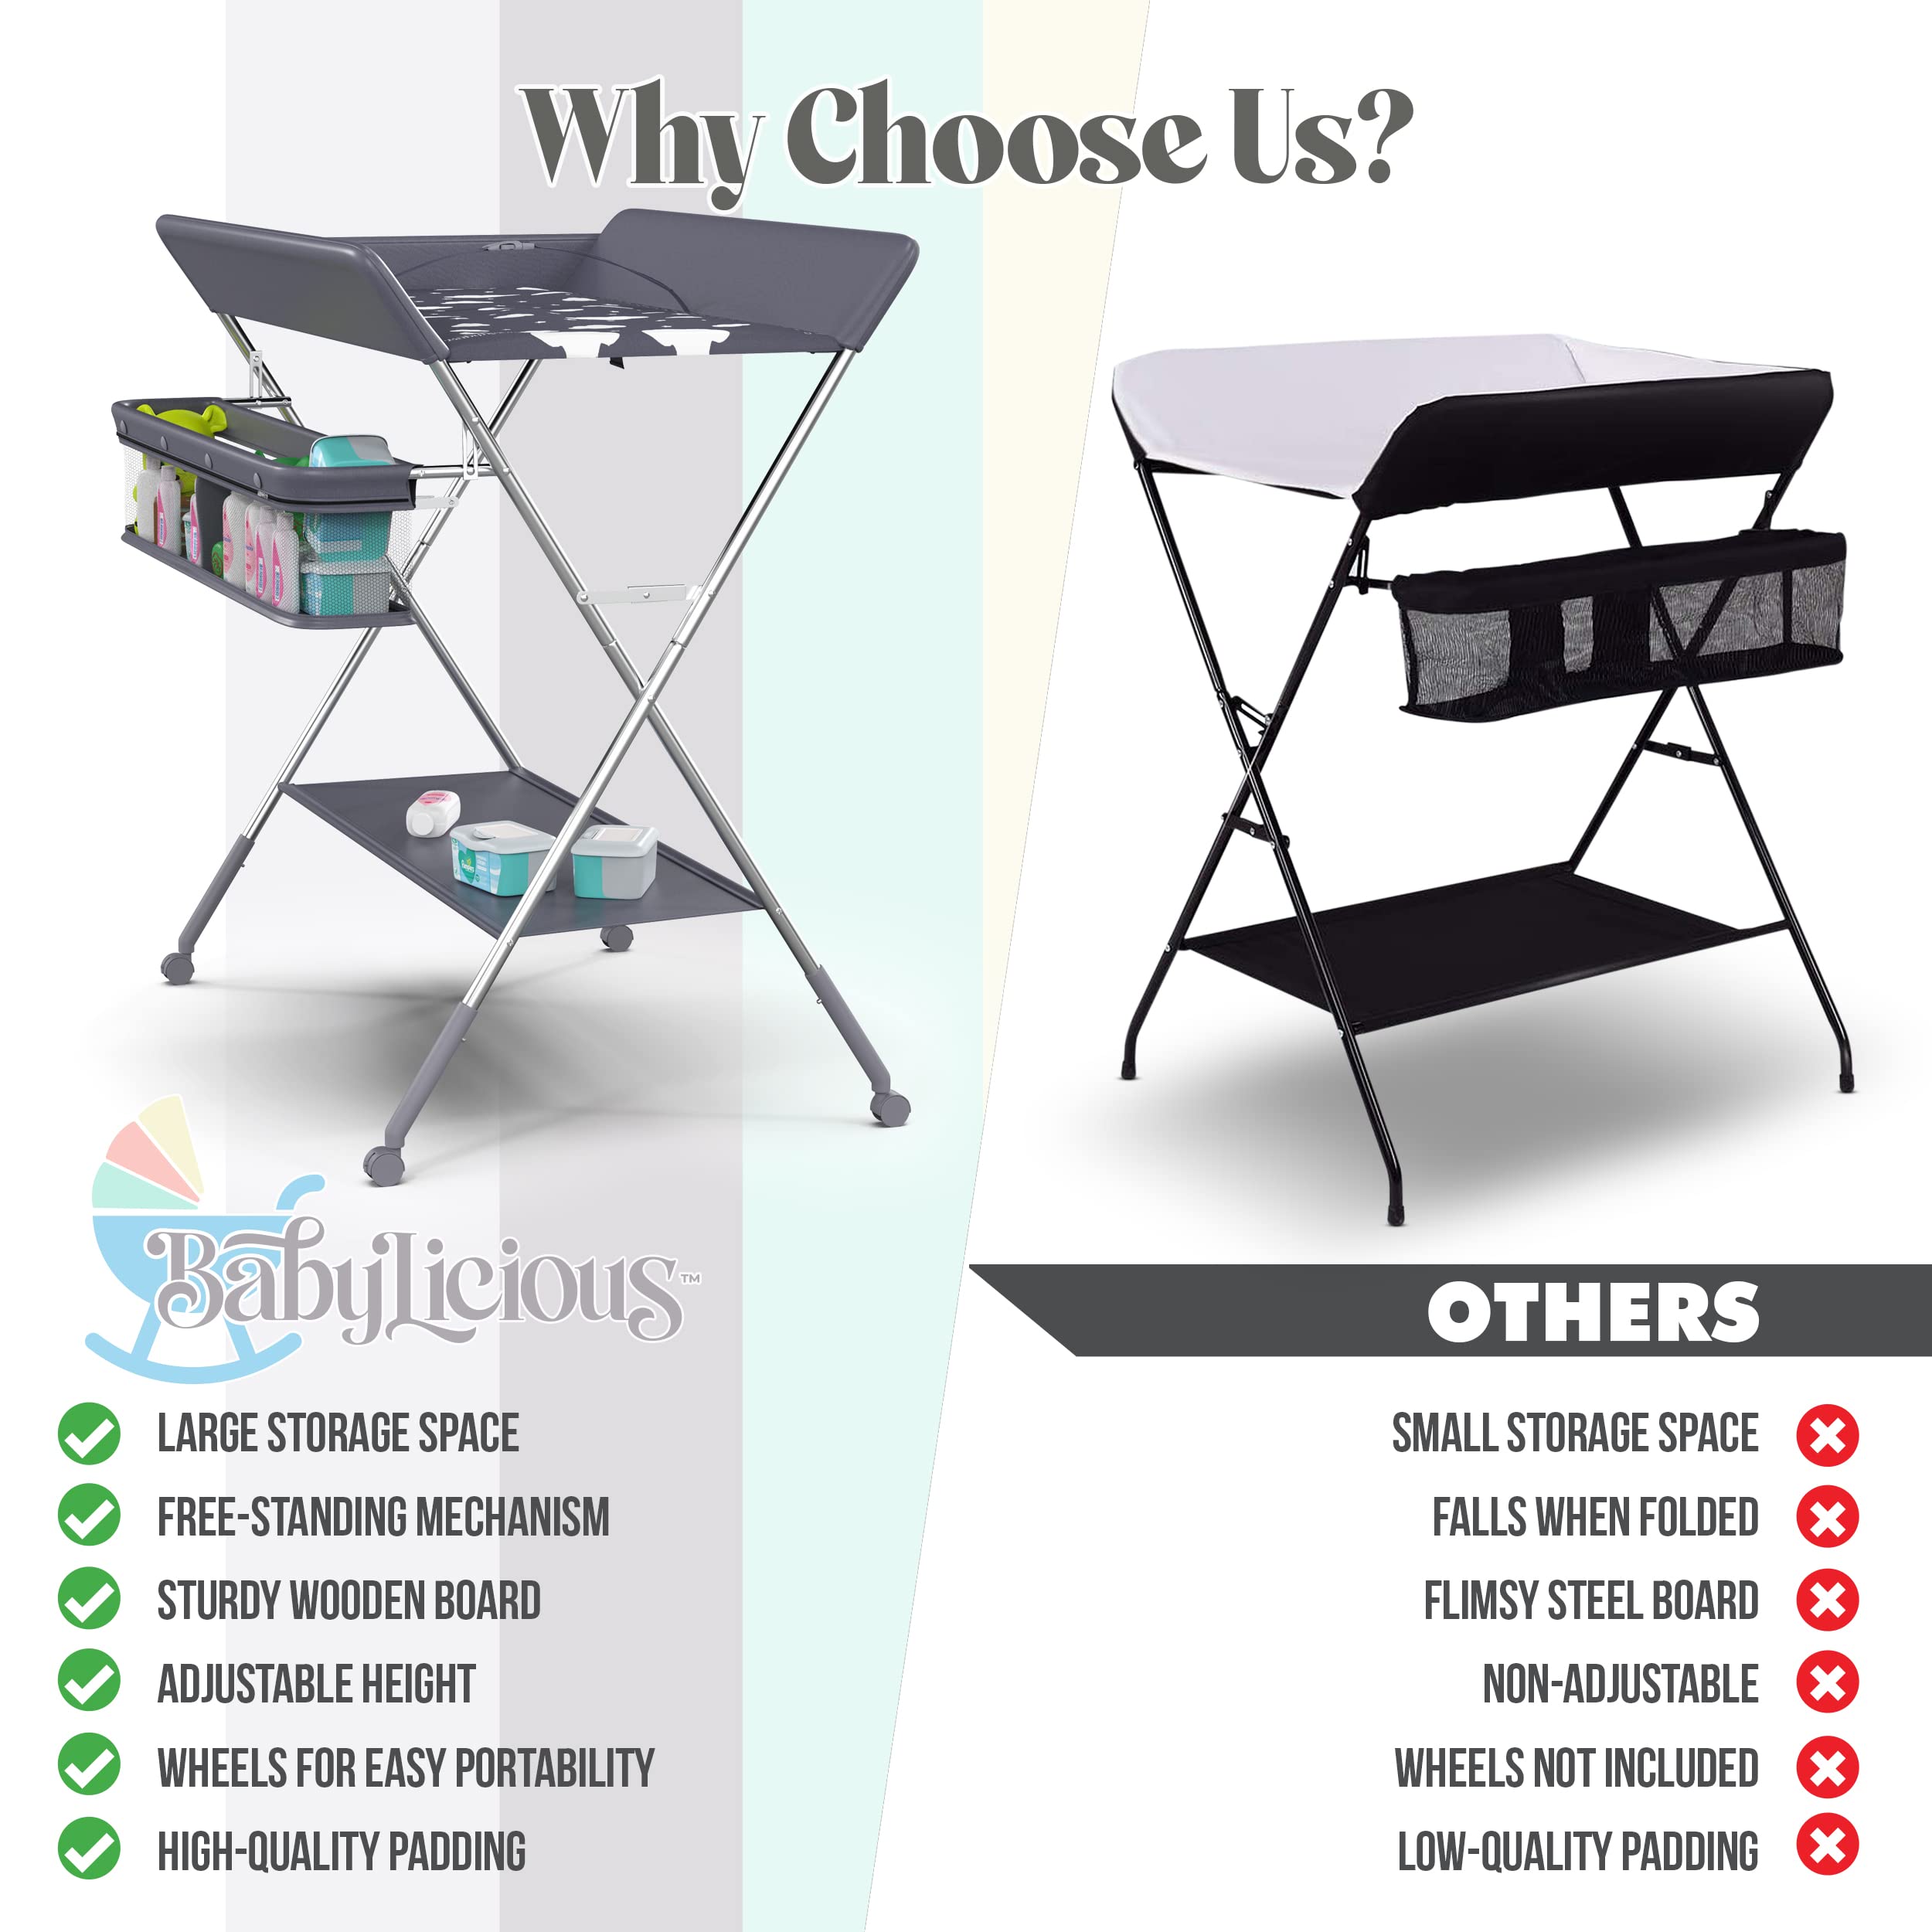 Babylicious Baby Portable Changing Table - Foldable Changing Table with Wheels - Portable Diaper Changing Station - Adjustable Height Baby Changing Table-Safety Belt and Large Storage Rack for Infants